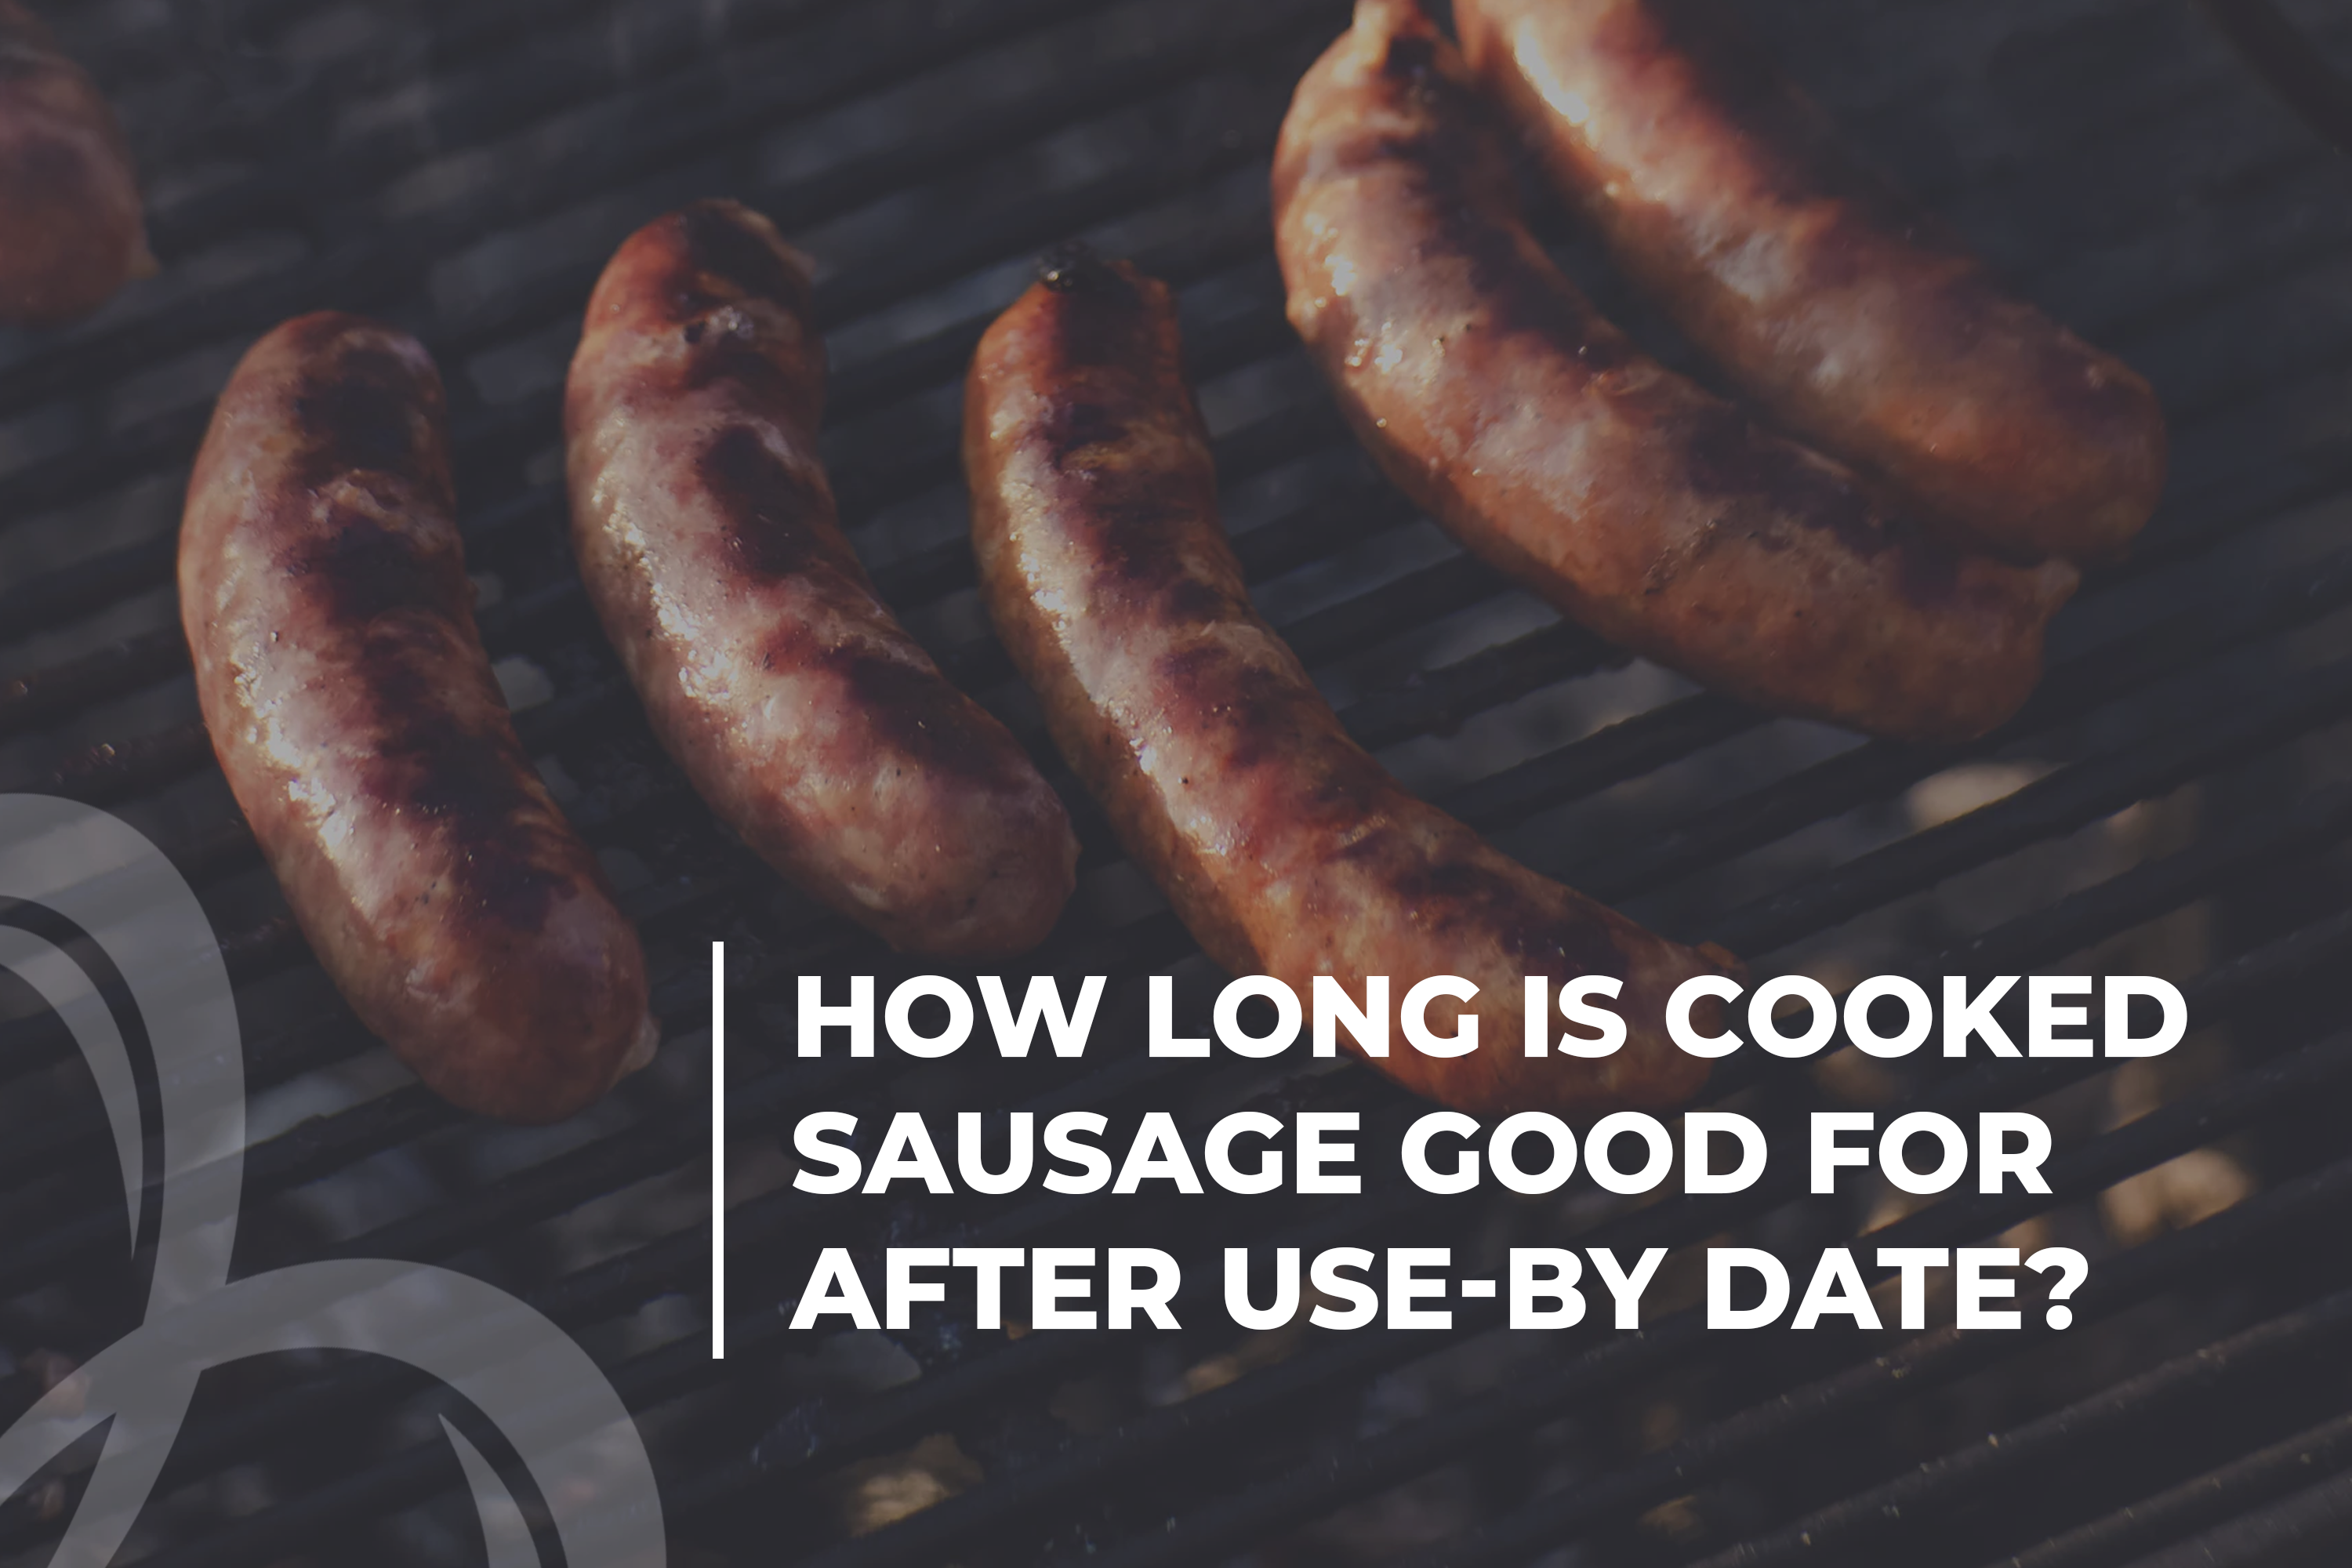 How long is cooked sausage good for after use by date